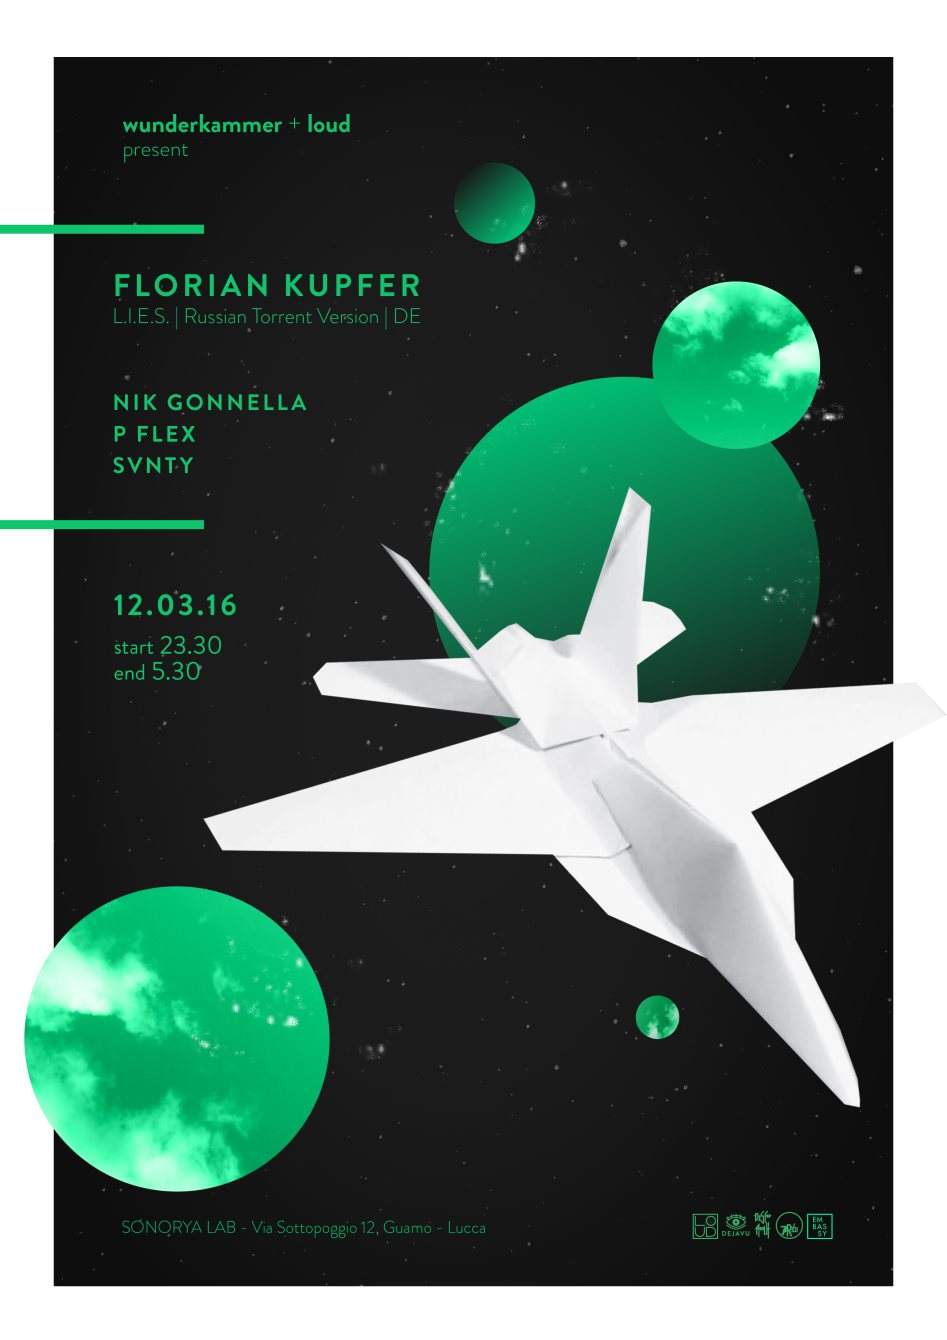 Loud & Wunderkammer with Florian Kupfer - フライヤー表